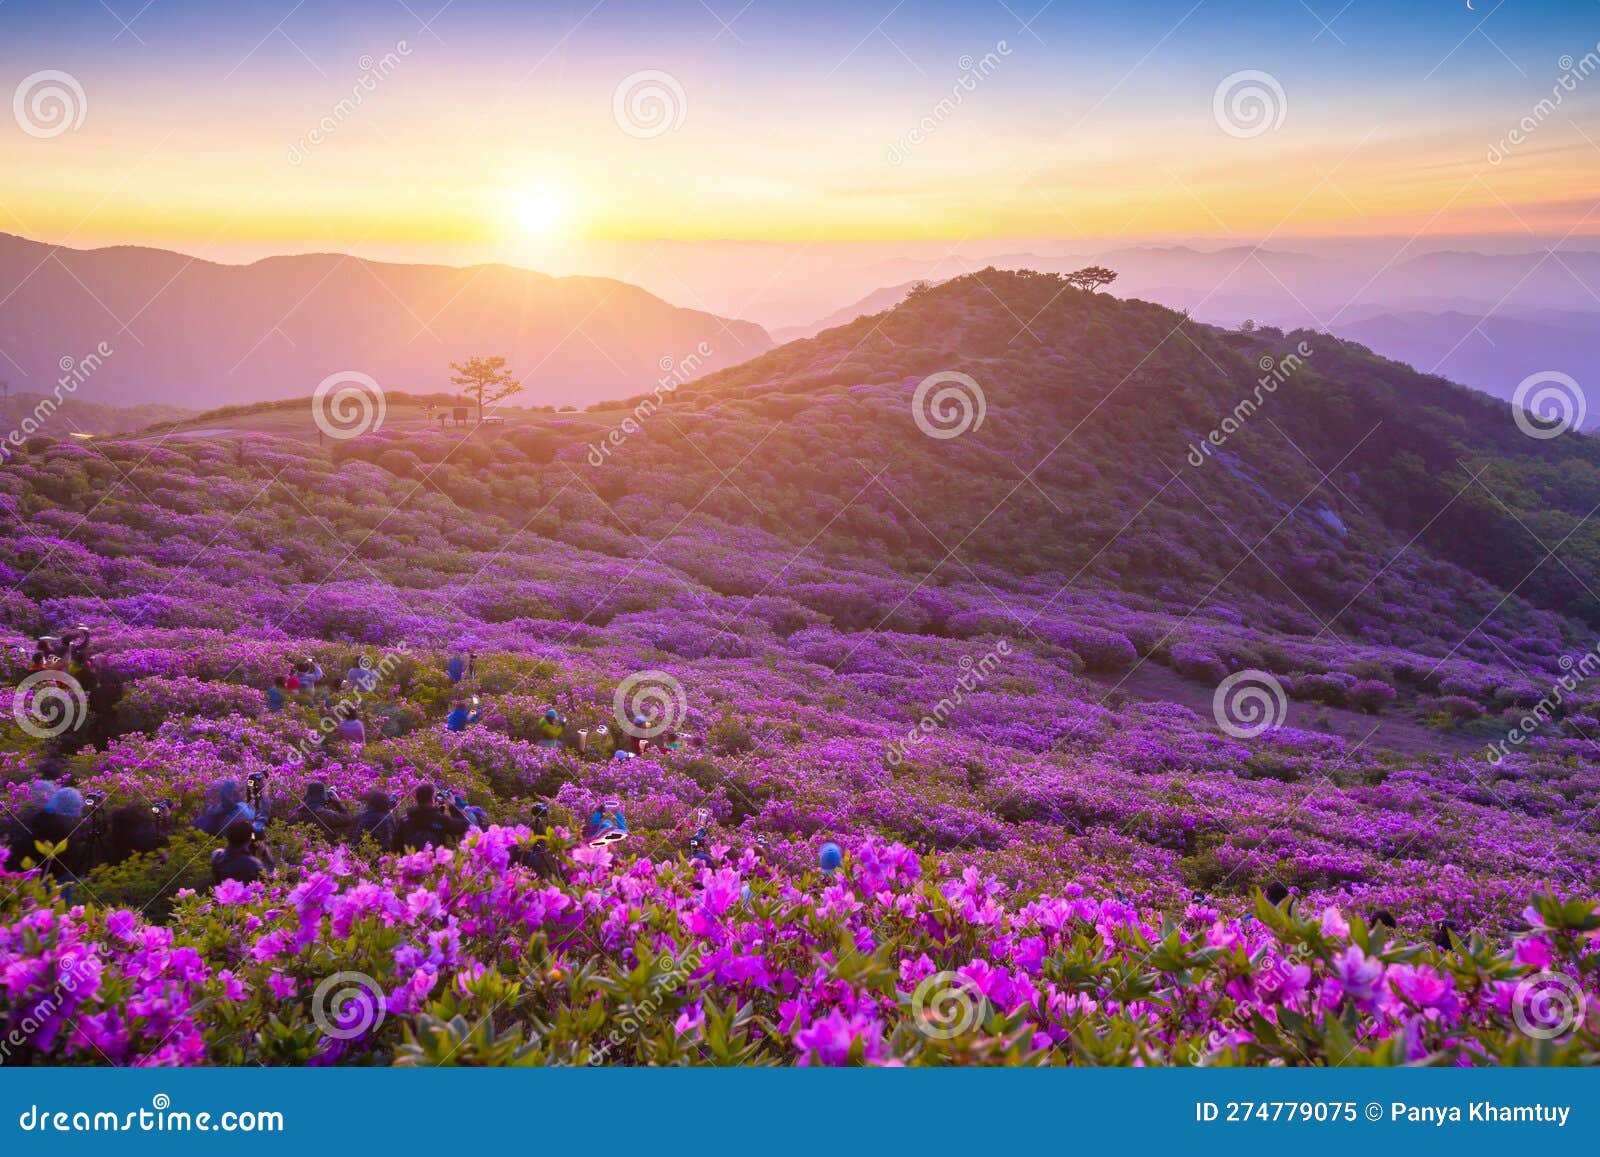 morning and spring view of pink azalea flowers at hwangmaesan mountain with the background of sunlight and foggy mountain range